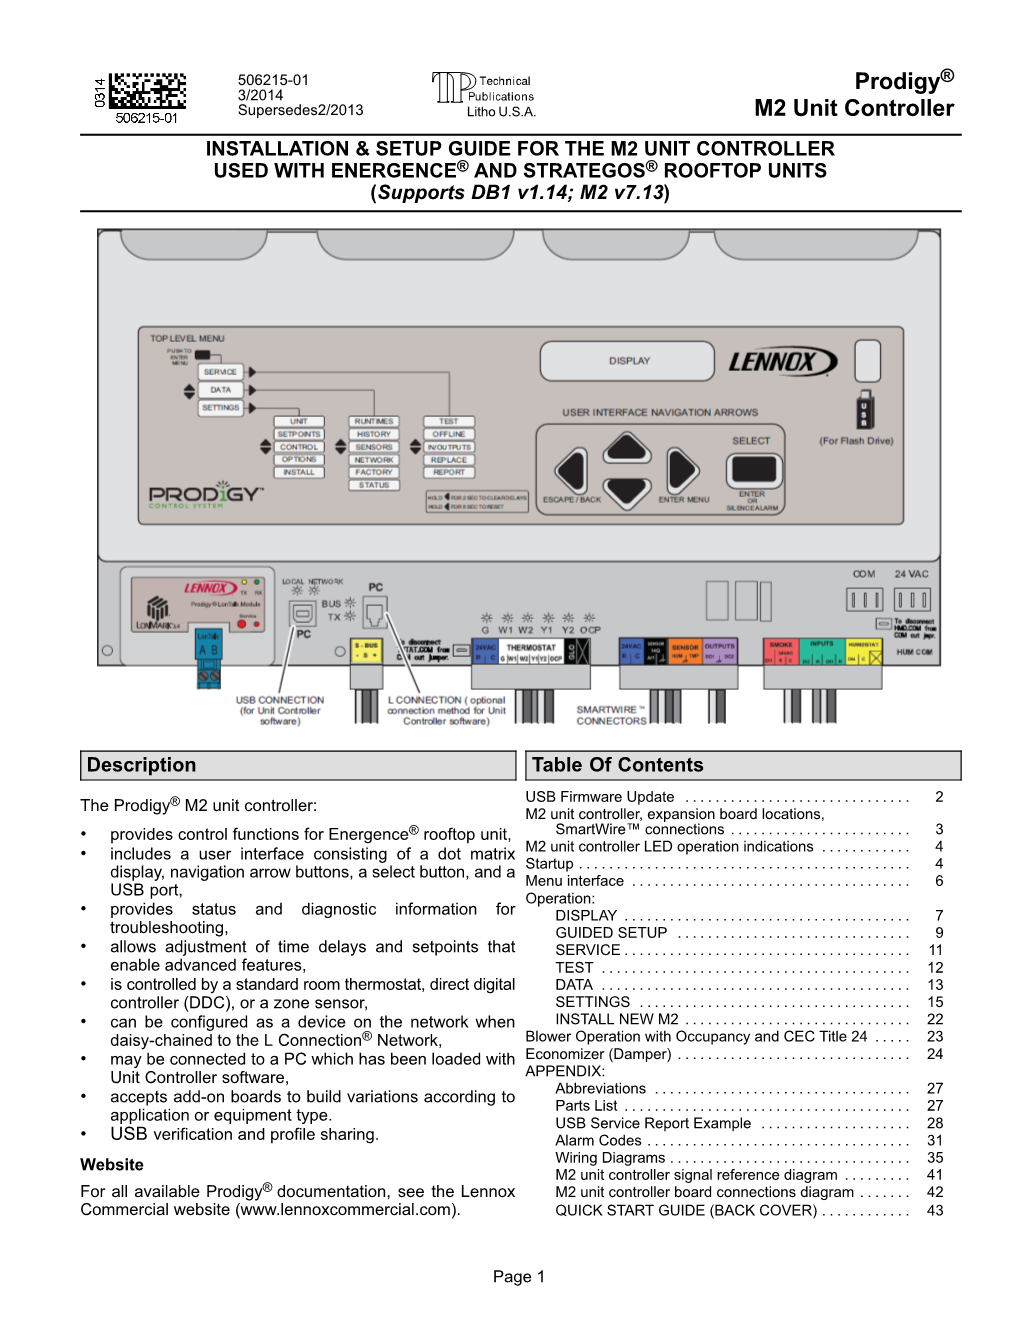 Prodigy® M2 Unit Controller: M2 Unit Controller, Expansion Board Locations, � Provides Control Functions for Energence® Rooftop Unit, Smartwire� Connections